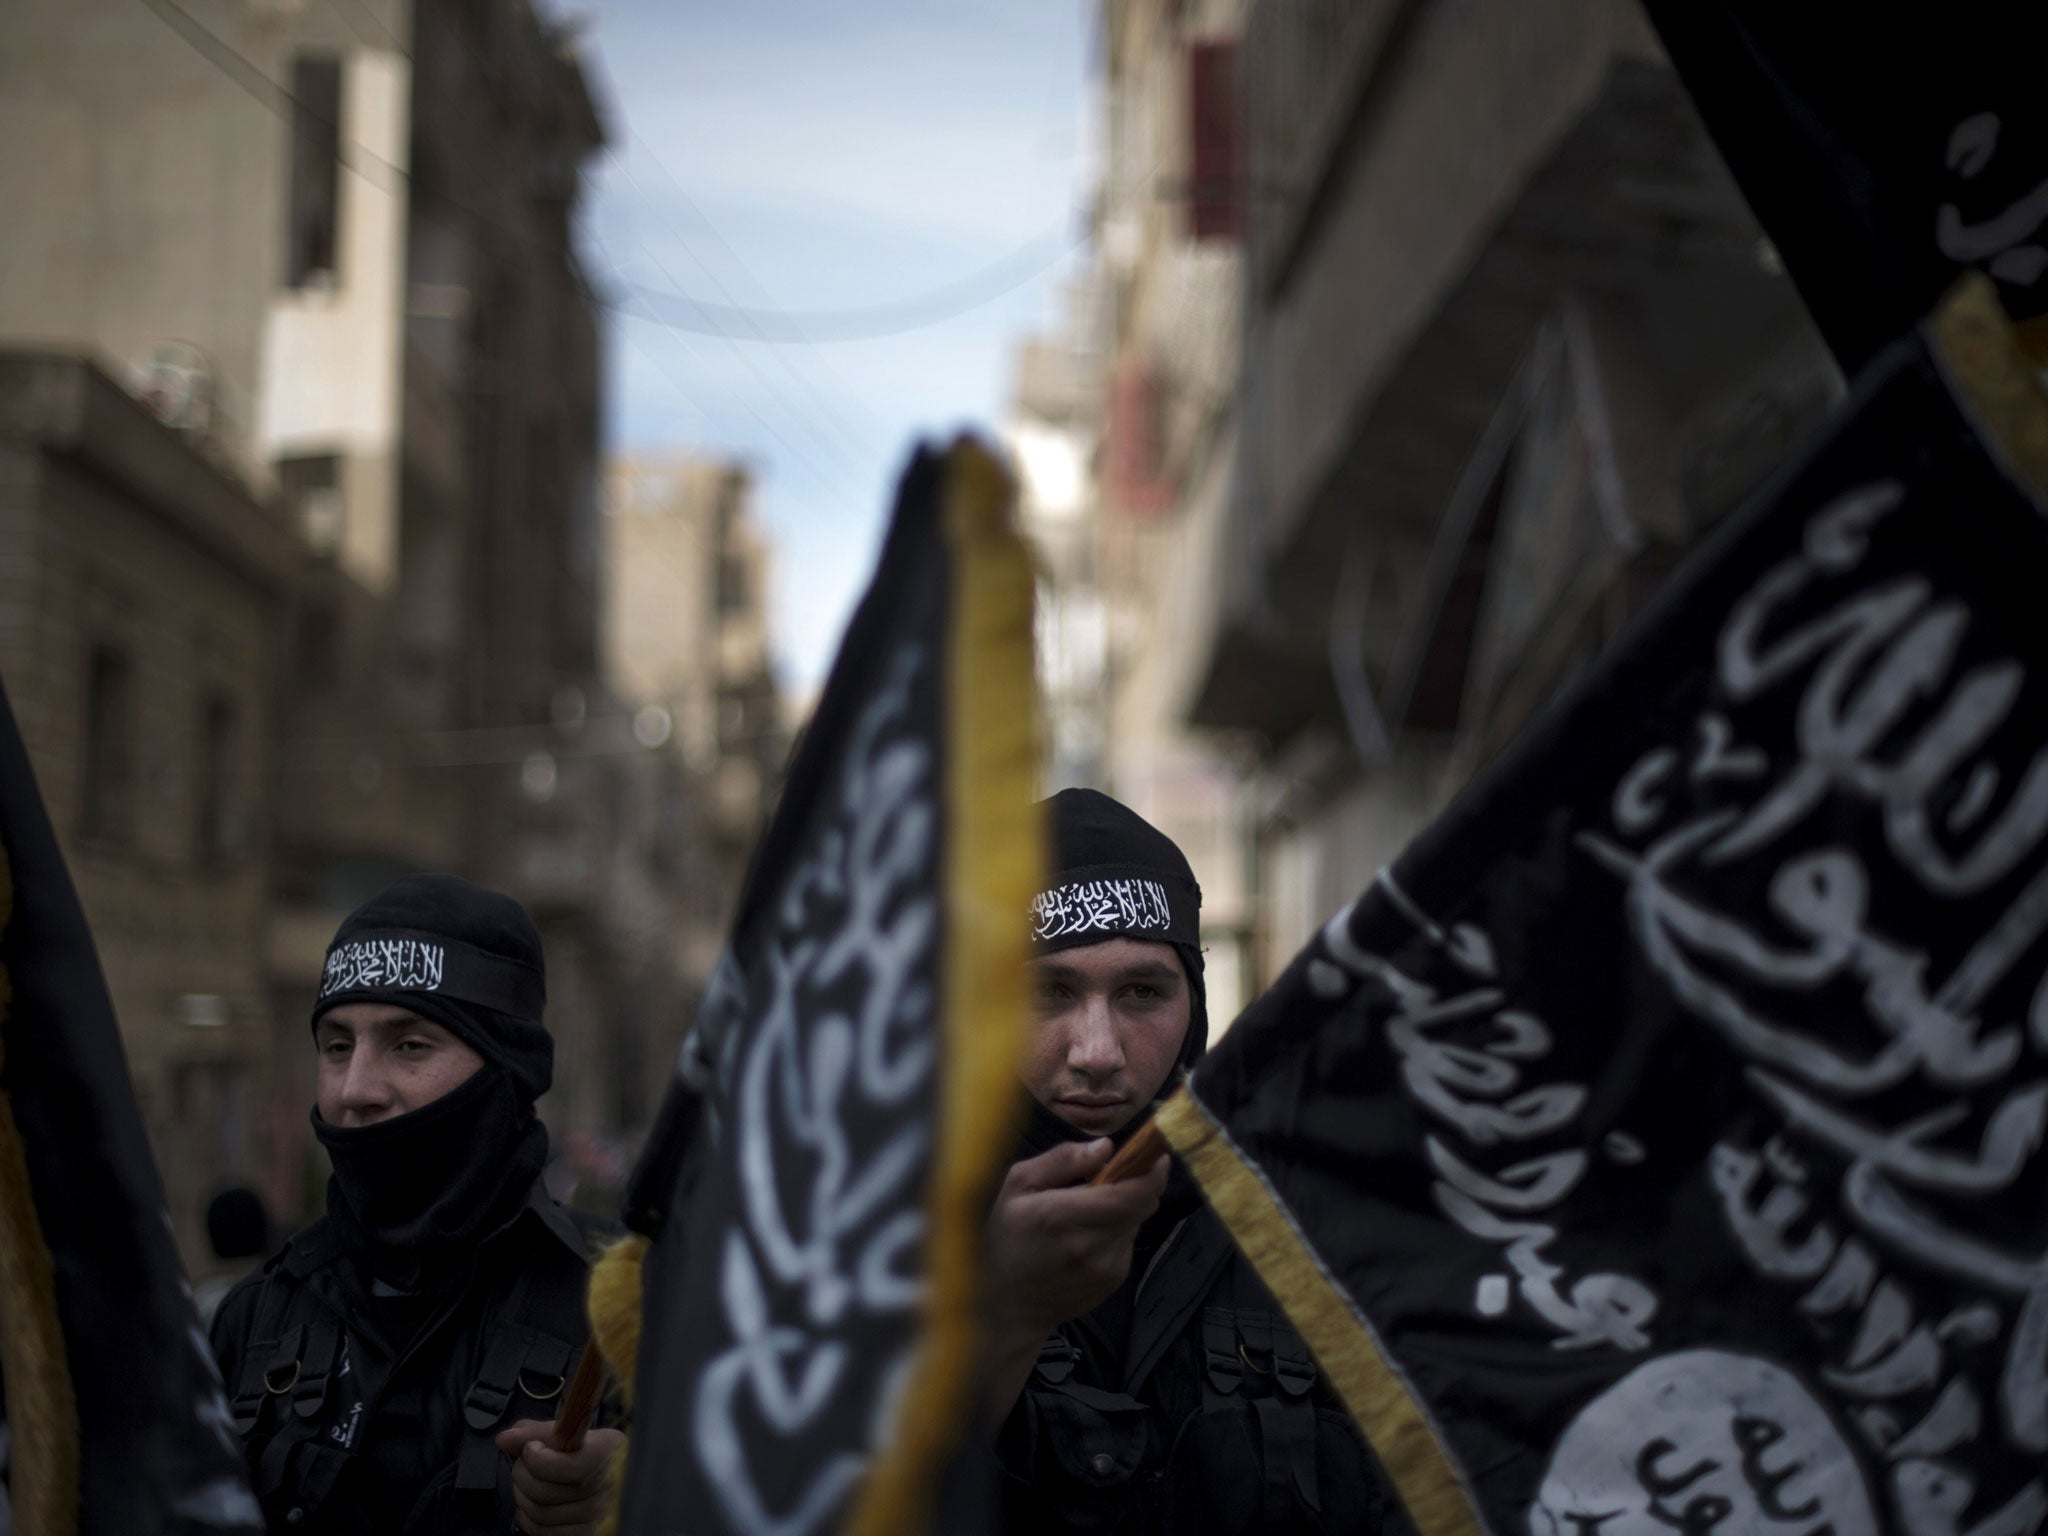 Jabhat al-Nusra militants have been fighting Isis for territory in Syria